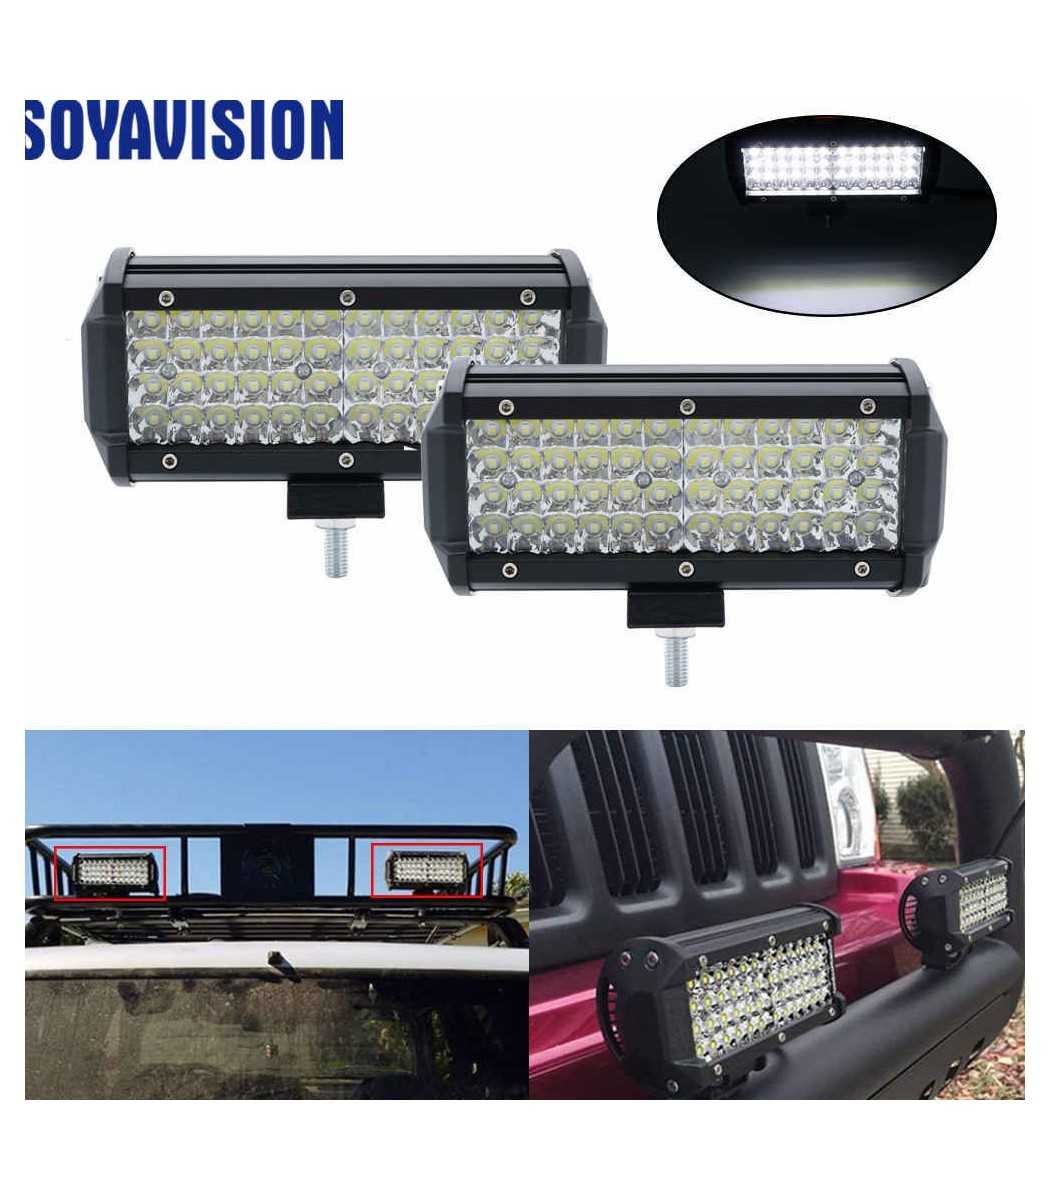 Willpower 2PCS 4 in Suqare Spot LED Work Light Bar 27W for Off- Road Van  Jeep SUV Truck Car ATV 4WD 4x4 RV UTE Tractor Vehicle Boat Driving Work